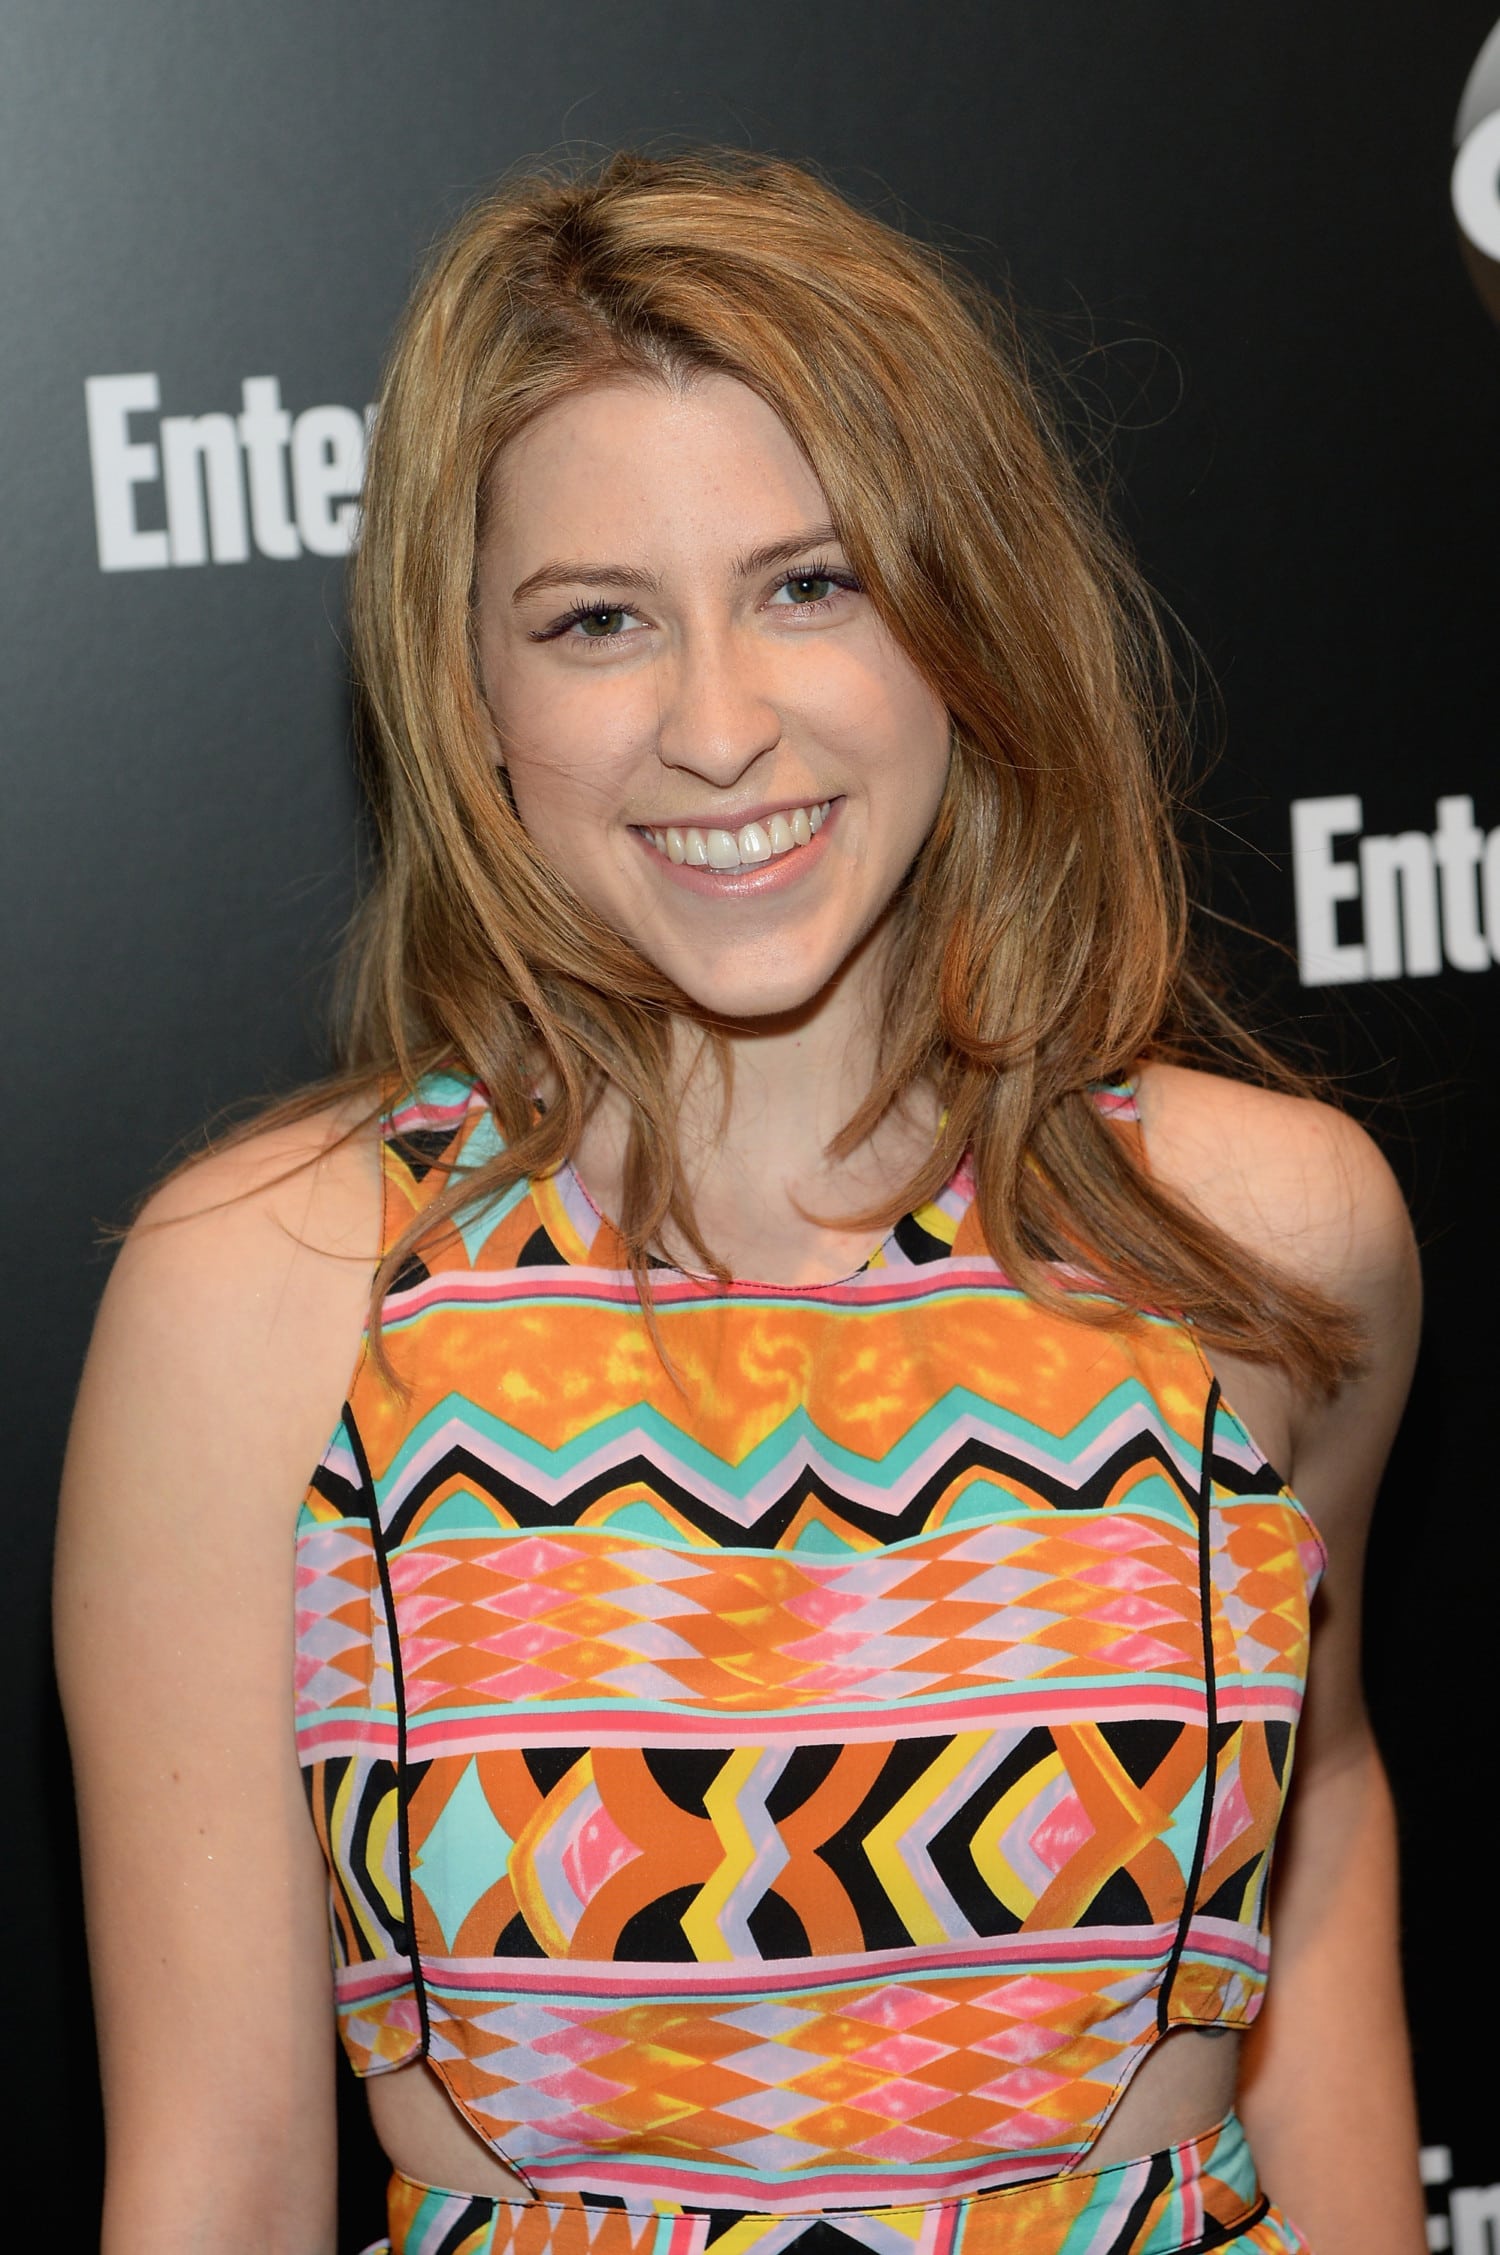 The Middle' spin-off about Sue Heck could be coming to ABC